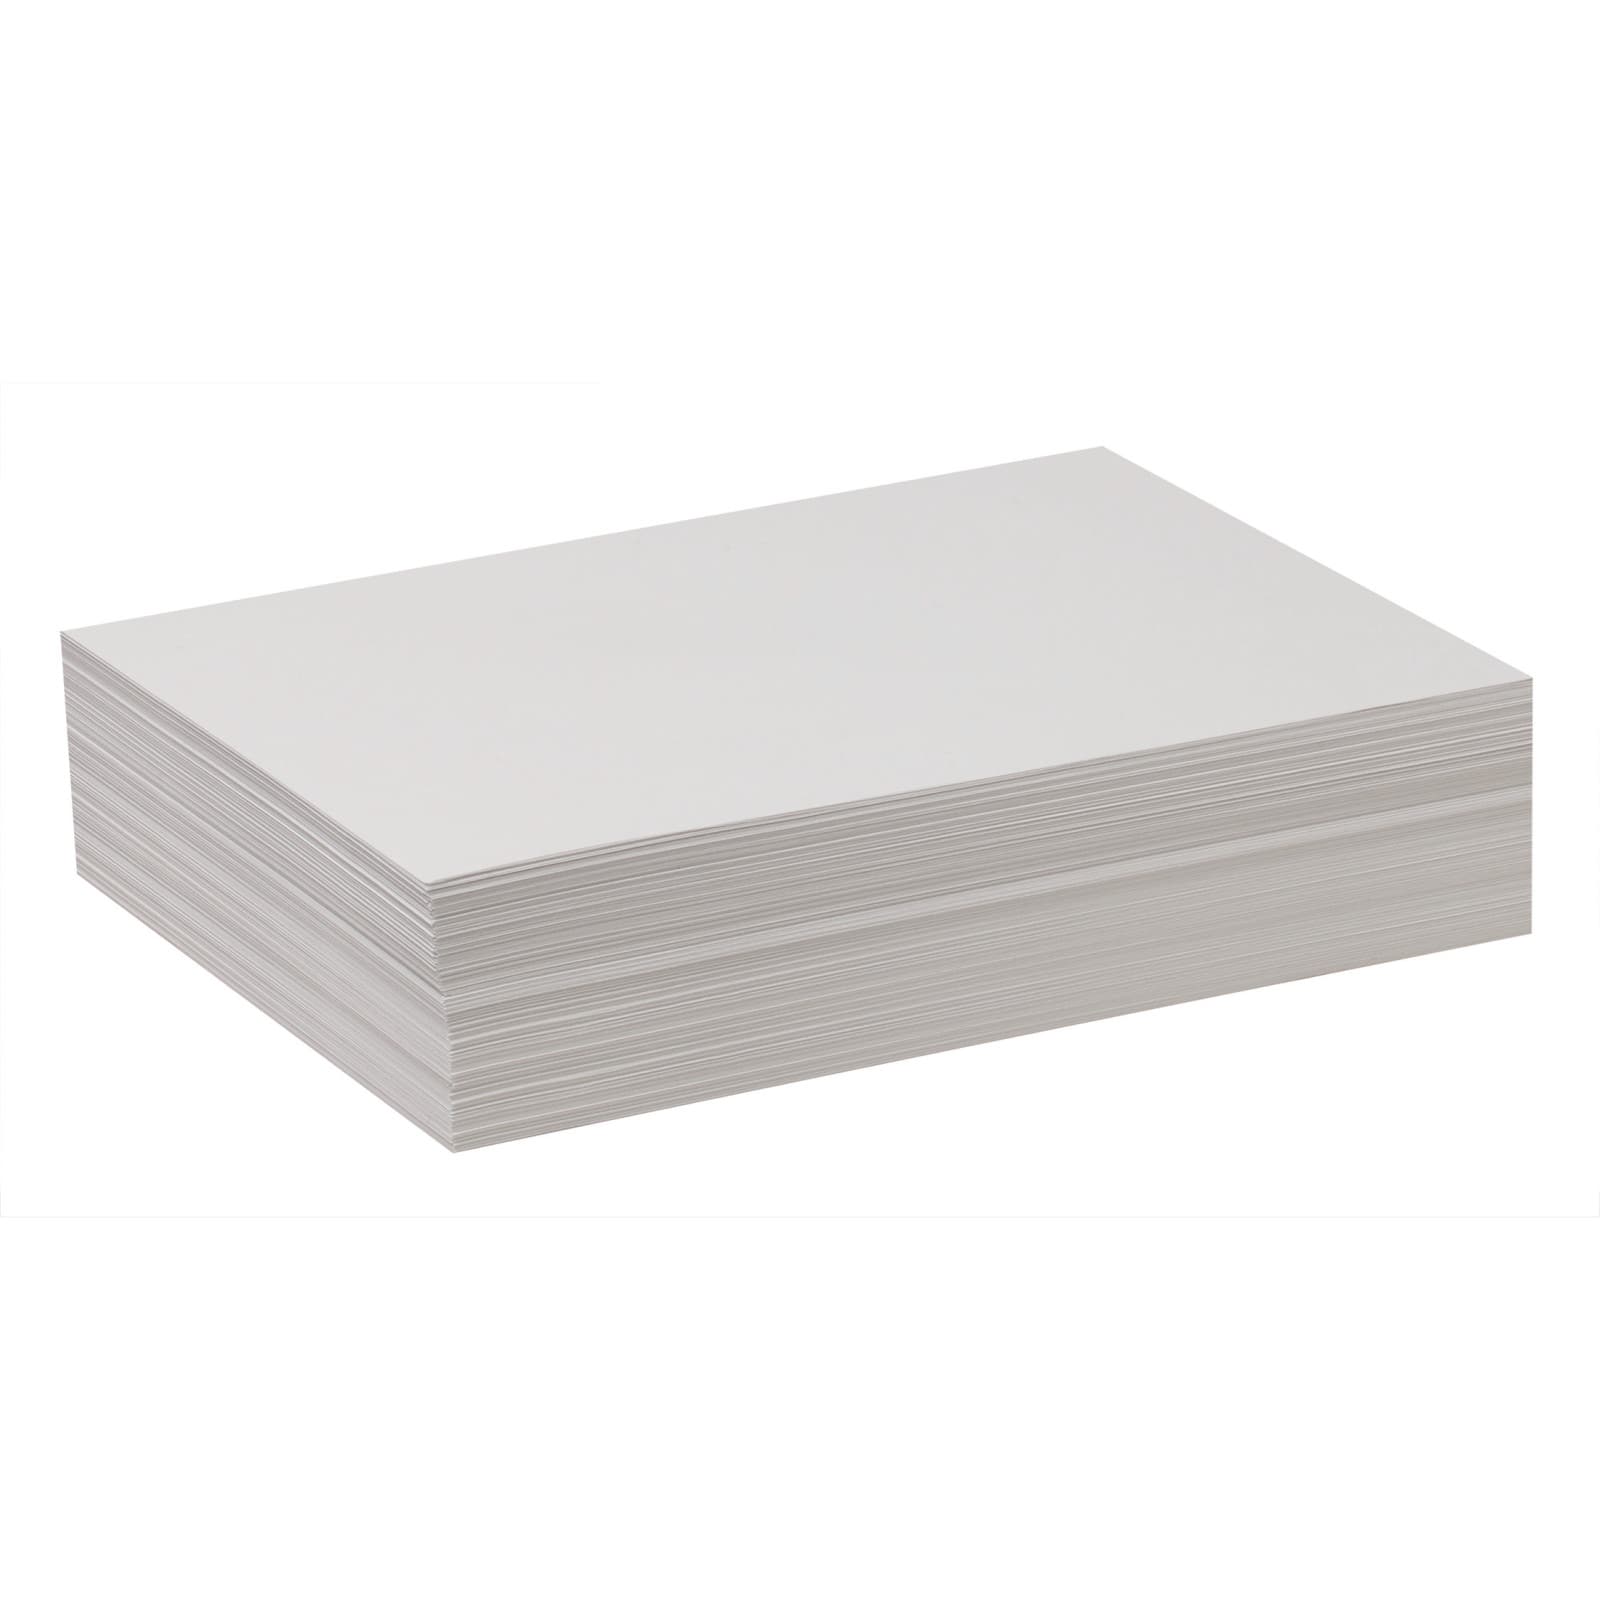 white sulphite paper, white sulphite paper Suppliers and Manufacturers at